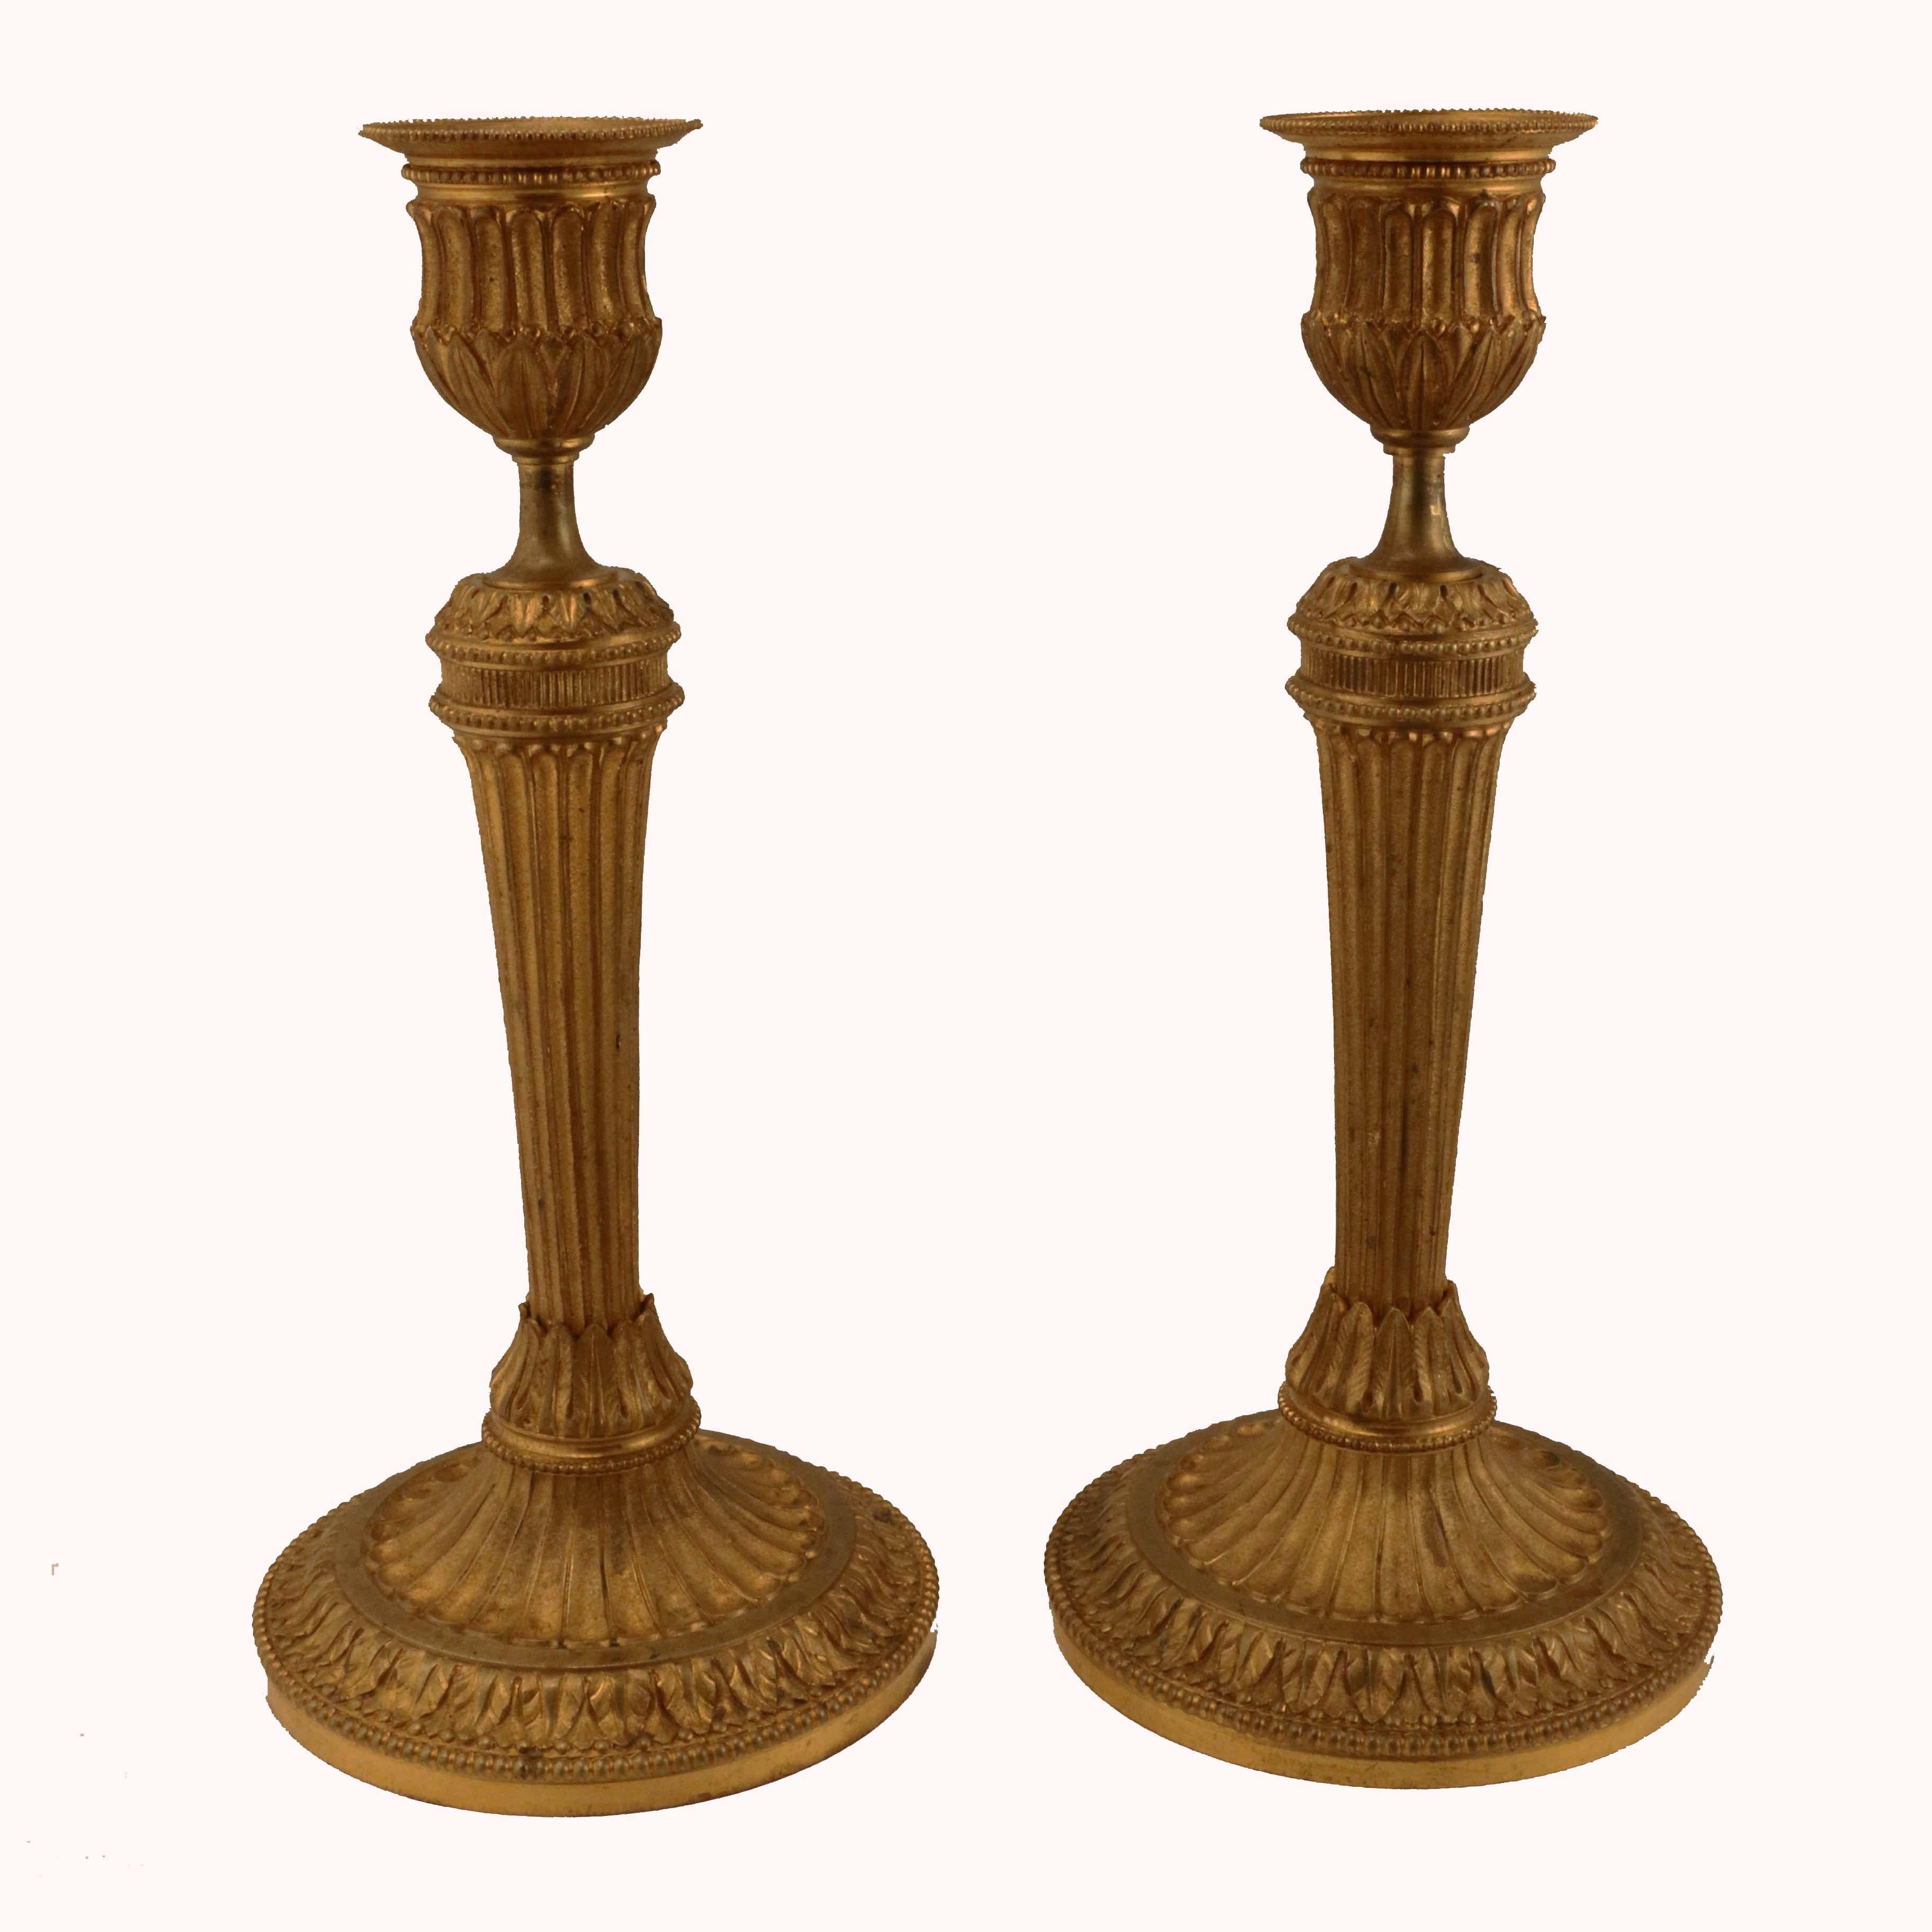 This pair are of Classic design and accomplished execution. The primary decorative motif is acanthus and beading. The base and column are reeded and have a matted finish. There are traces of gilding which give a sense of their age and quality.